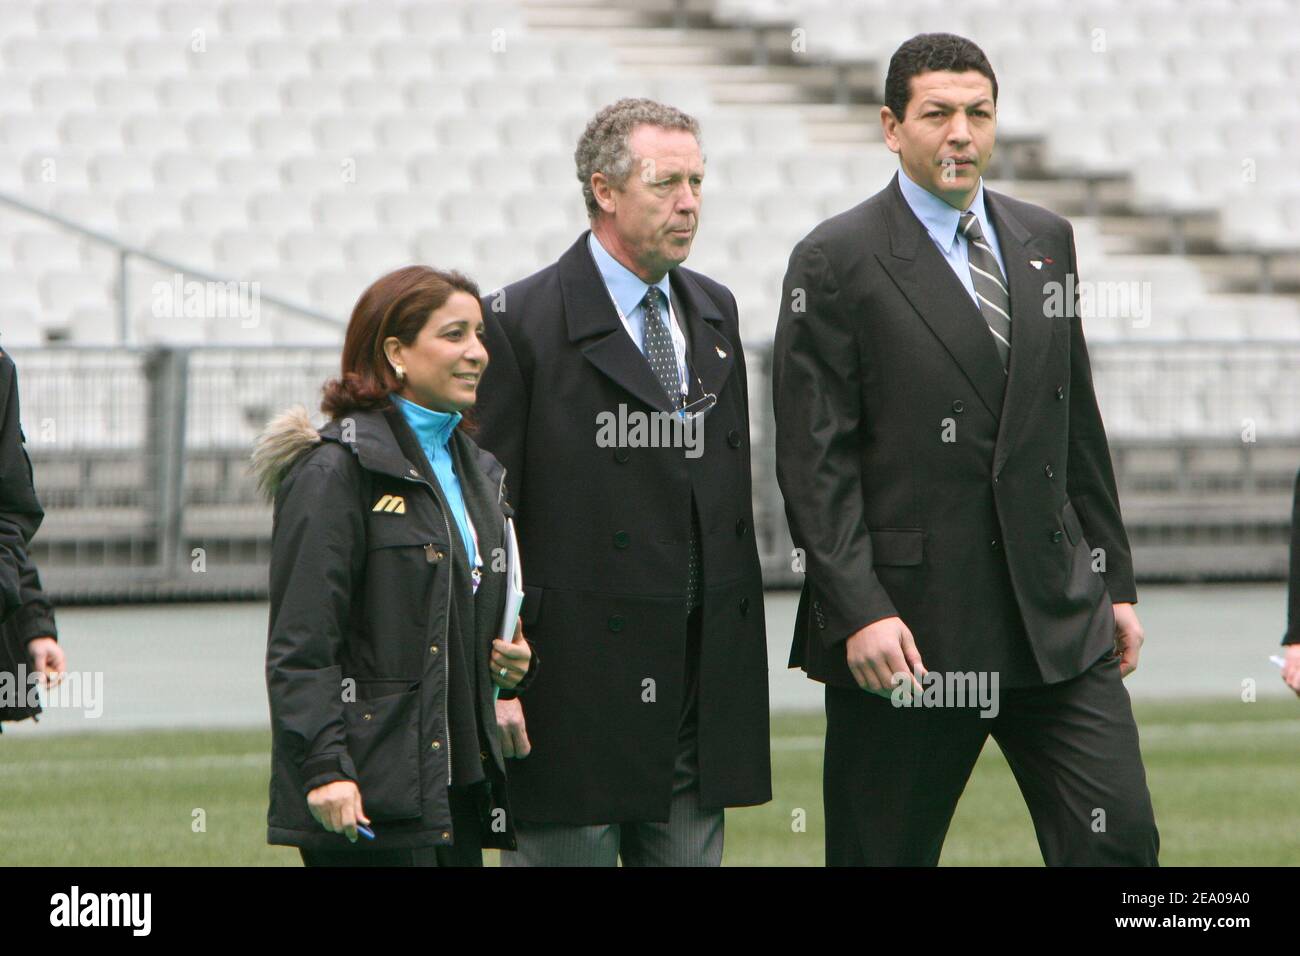 President of the International Olympic Committee's evaluation commission Nawal El Moutawakel and Guy Drut and Abdelatif Benazzi visit the Stade de France in Saint-Denis near Paris on March 10, 2005. Photo by Mousse/ABACA. Stock Photo